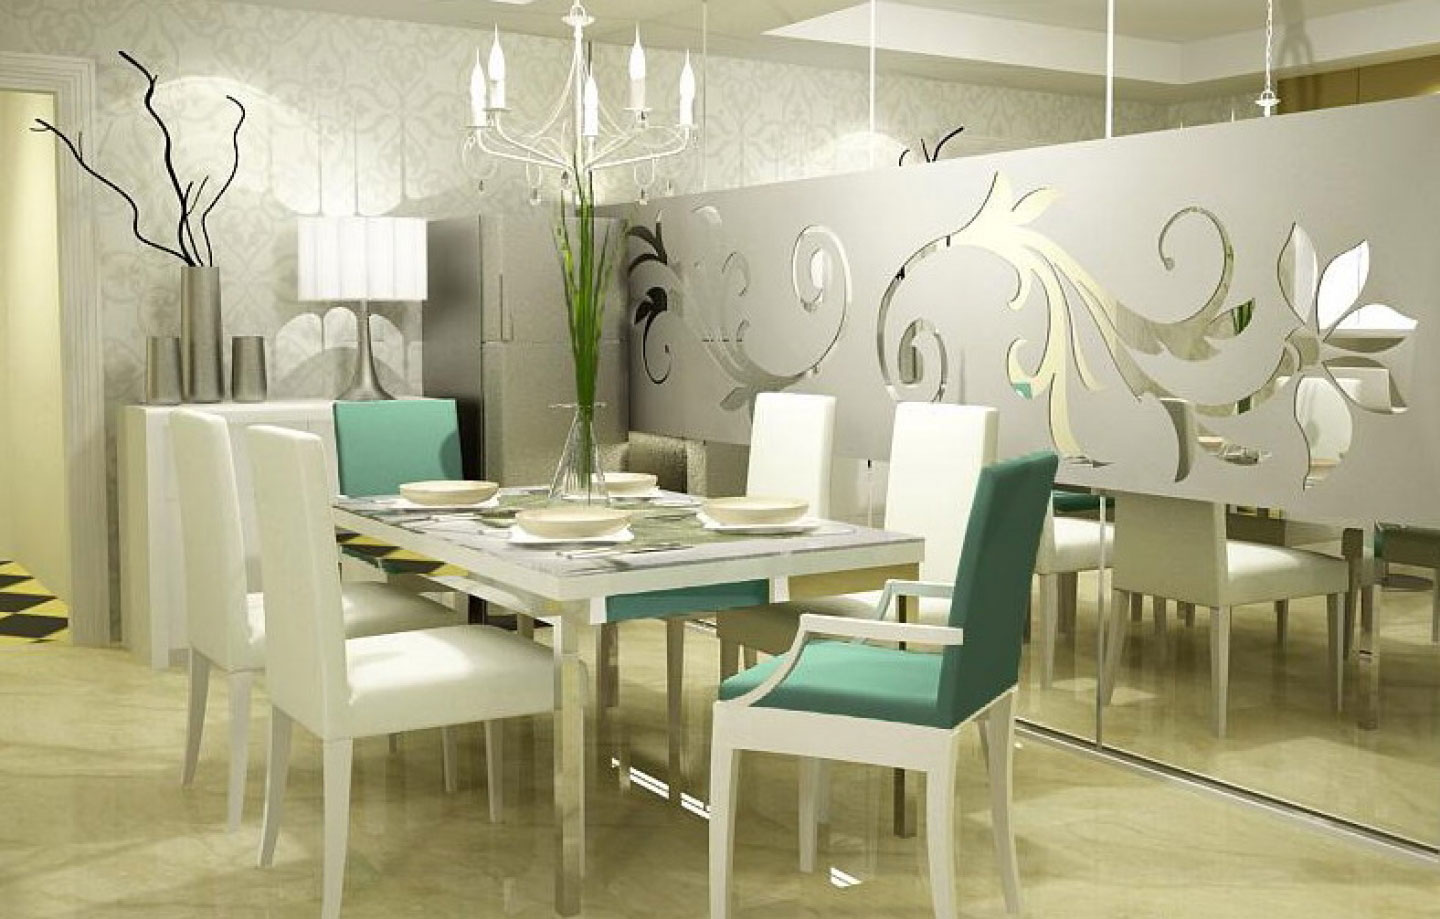 Dining Room Wall Modern Dining Room With Mirrored Wall Panel Idea Feat White Chandelier Also Glass Table Design Plus Comfy Upholstered Chairs Dining Room Modern Dining Room In Stylish And Artistic Design